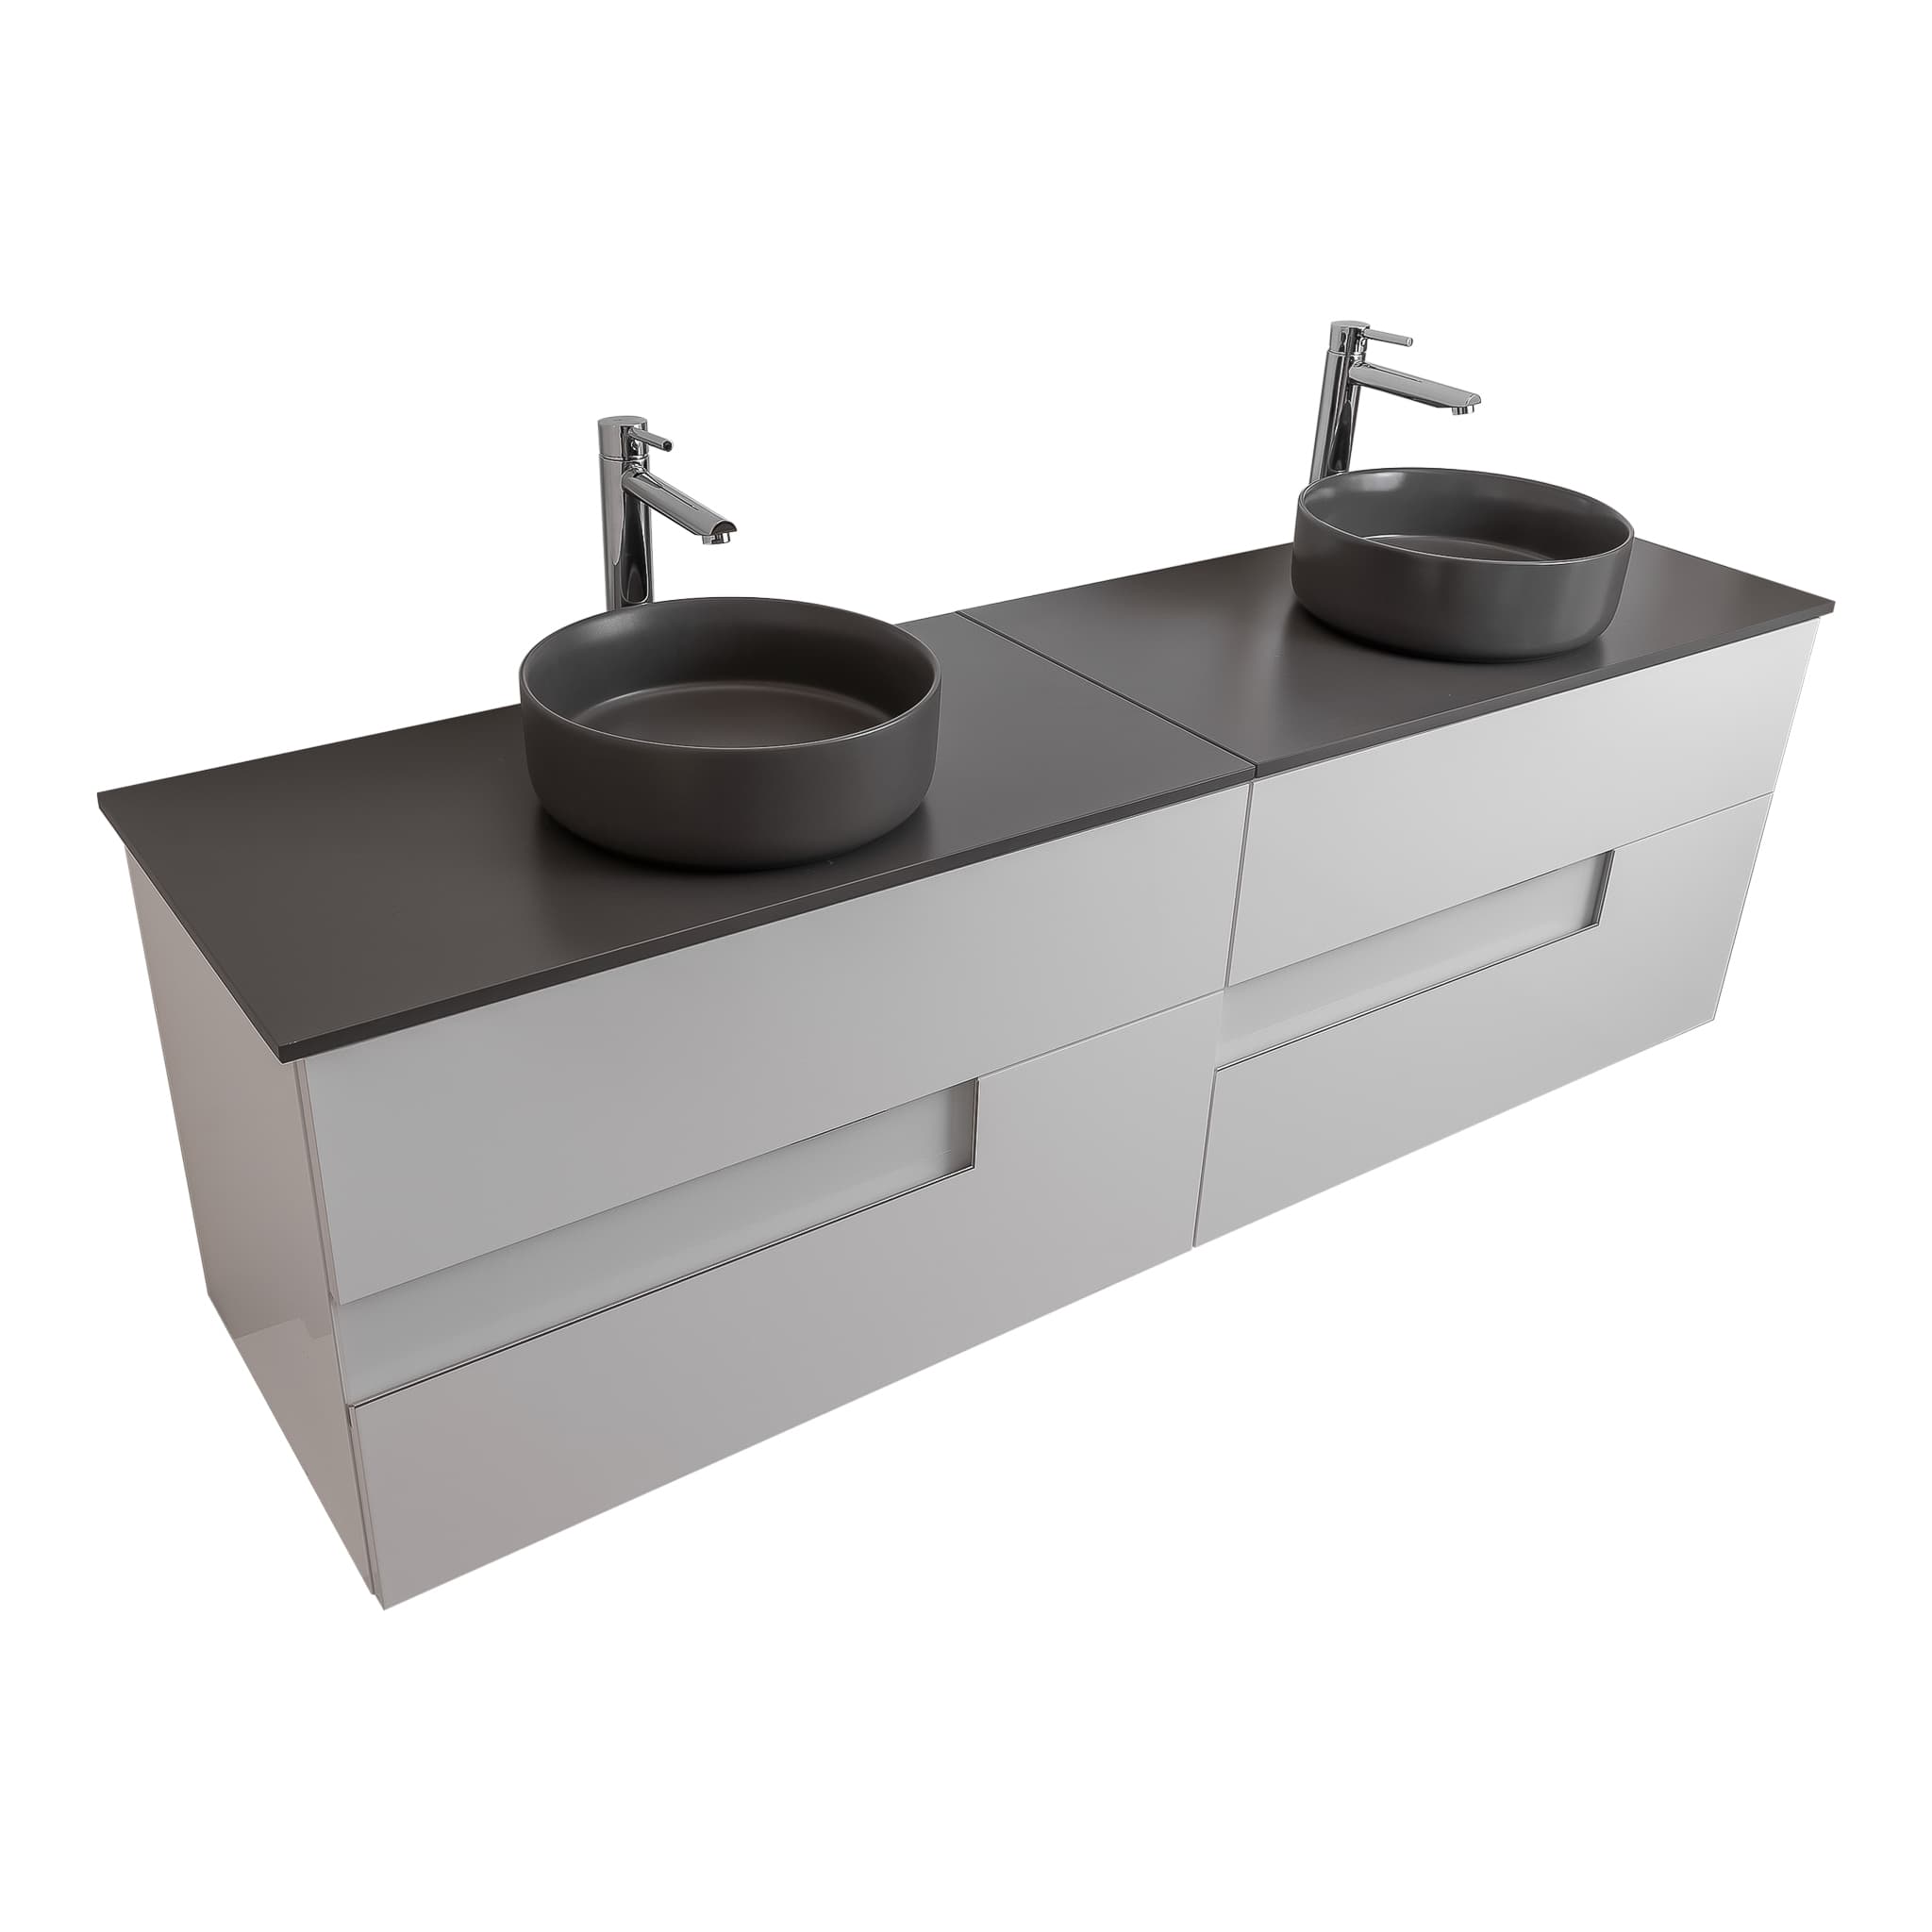 Vision 72 White High Gloss Cabinet, Ares Grey Ceniza Top And Two Ares Grey Ceniza Ceramic Basin, Wall Mounted Modern Vanity Set